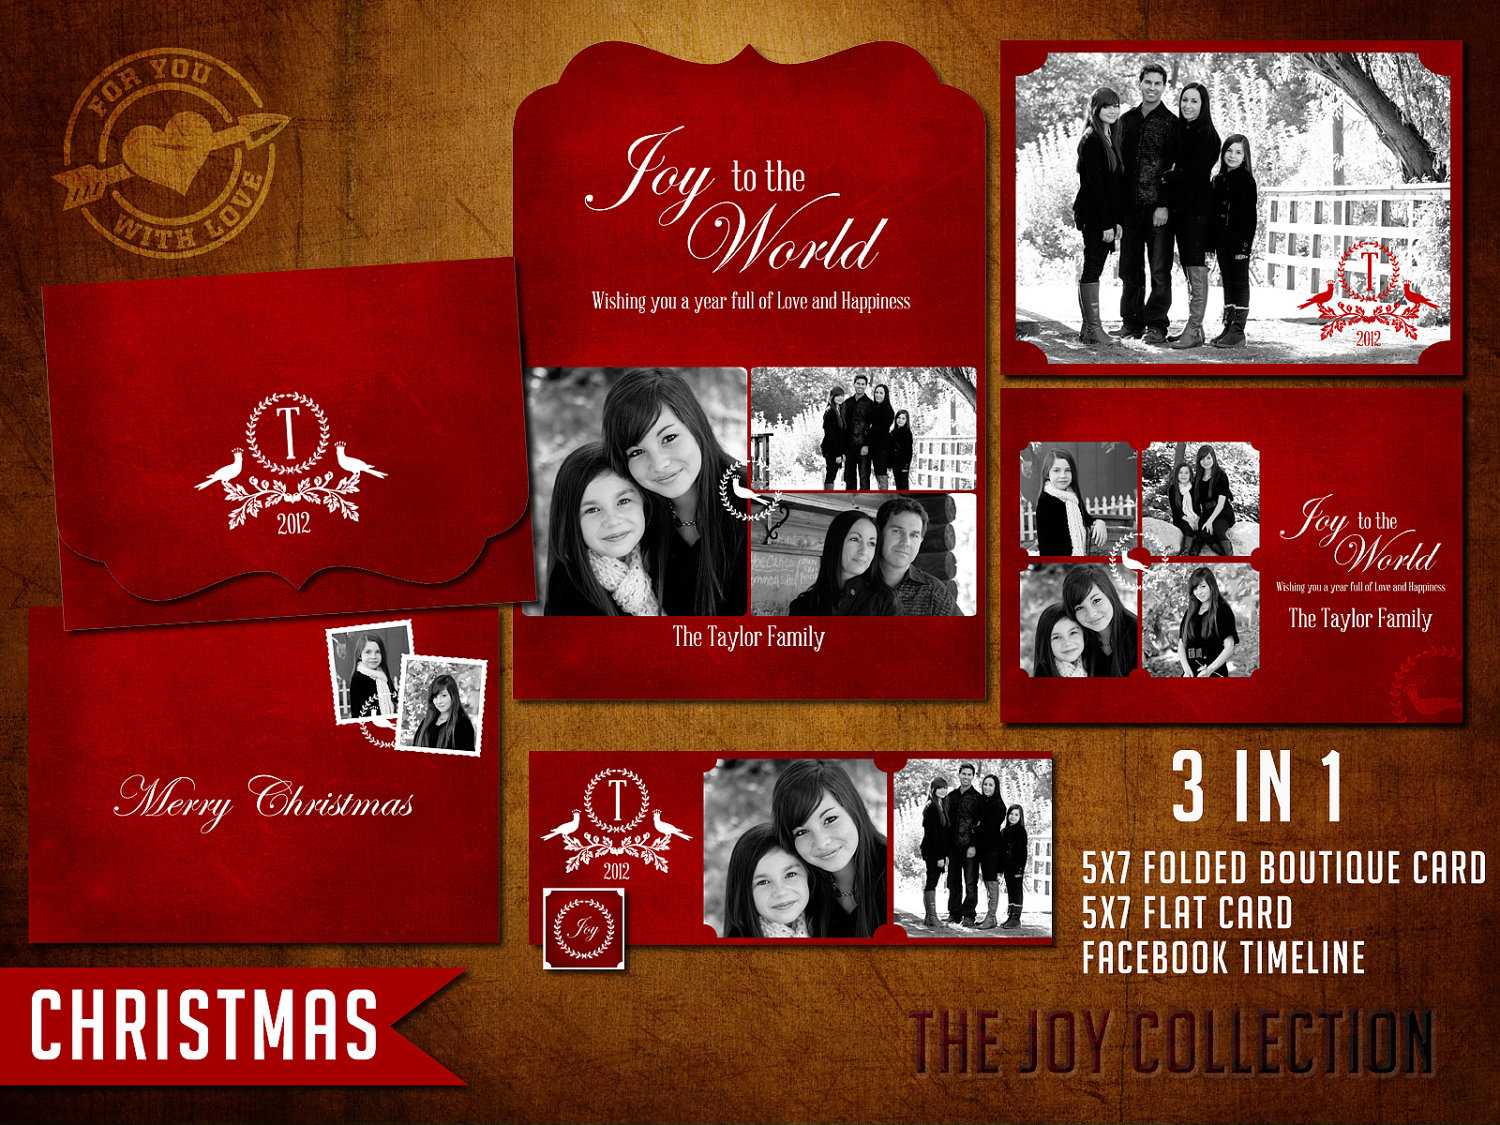 100+ [ Pages Christmas Card Templates ] | Christmas Party With Free Photoshop Christmas Card Templates For Photographers